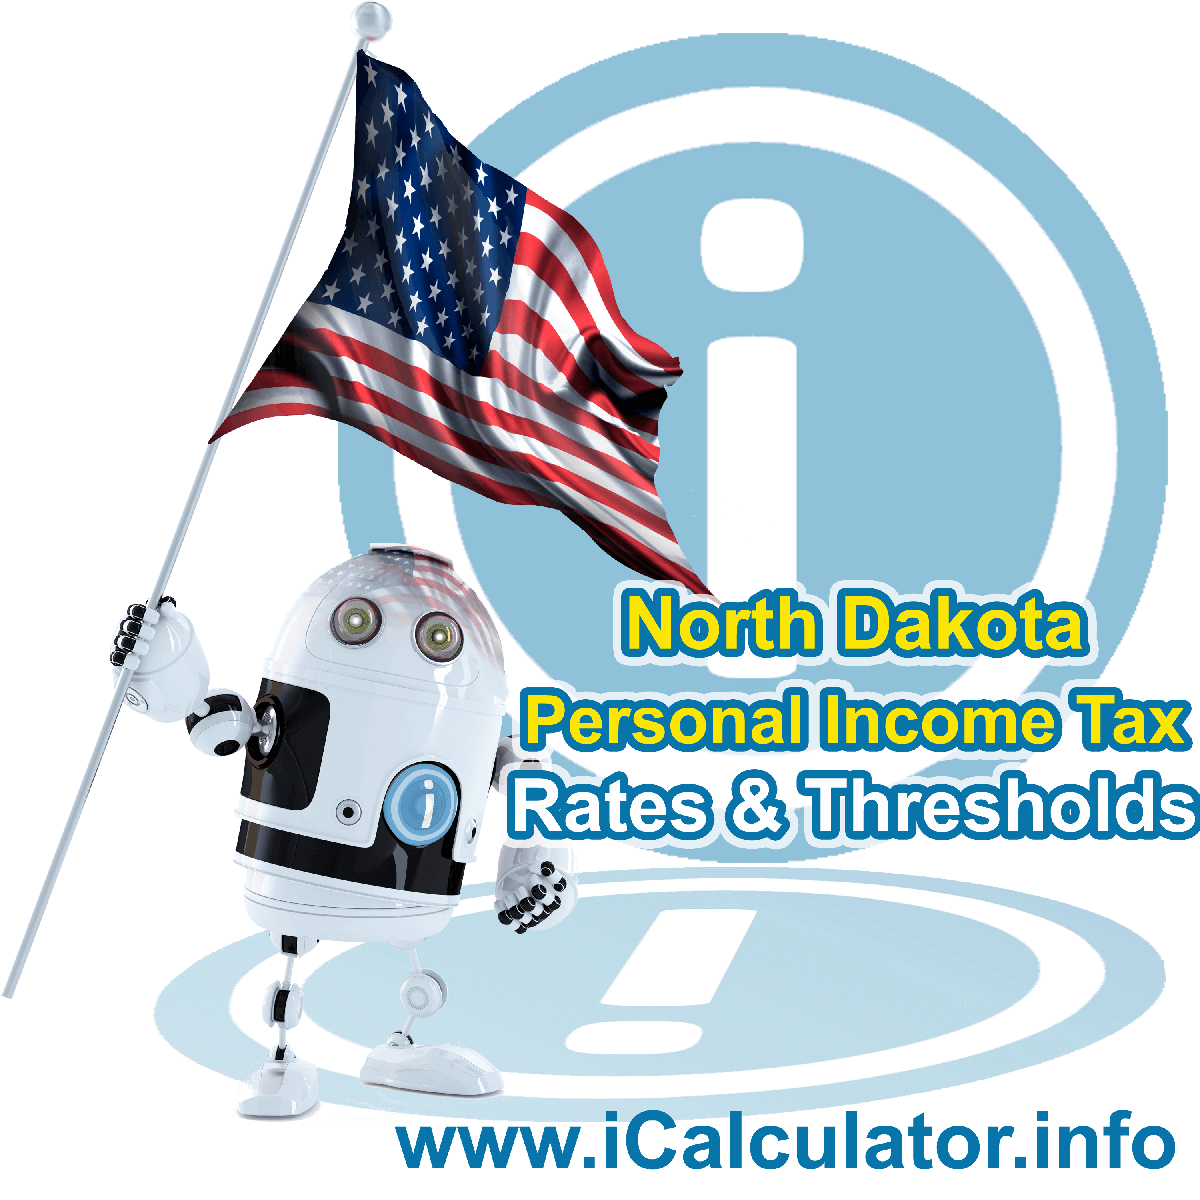 North Dakota State Tax Tables 2018. This image displays details of the North Dakota State Tax Tables for the 2018 tax return year which is provided in support of the 2018 US Tax Calculator